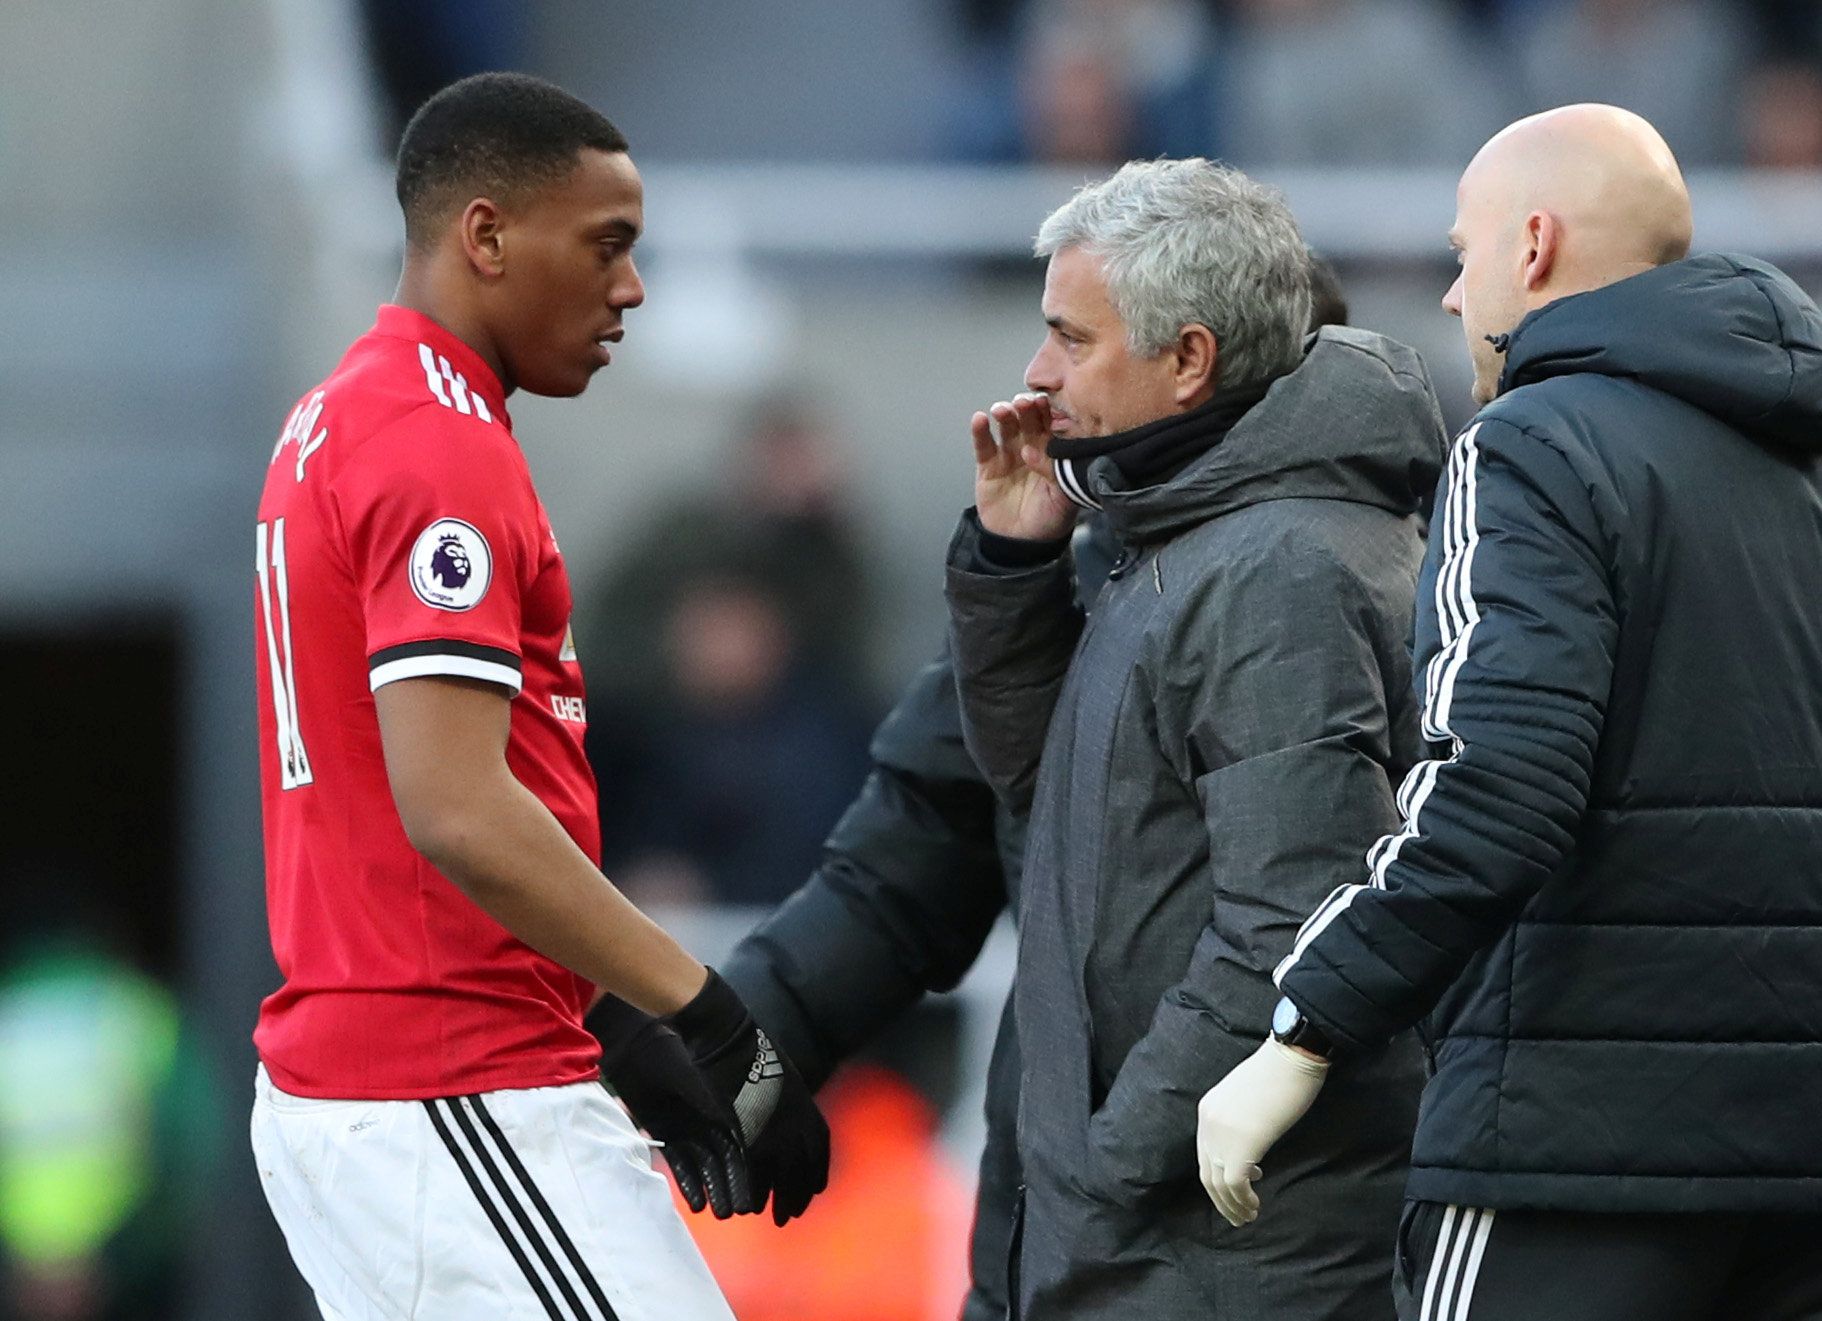 Soccer Football - Premier League - Newcastle United vs Manchester United - St James' Park, Newcastle, Britain - February 11, 2018   Manchester United manager Jose Mourinho talks to Anthony Martial as he comes off the pitch for receiving medical treatment   REUTERS/Scott Heppell    EDITORIAL USE ONLY. No use with unauthorized audio, video, data, fixture lists, club/league logos or 